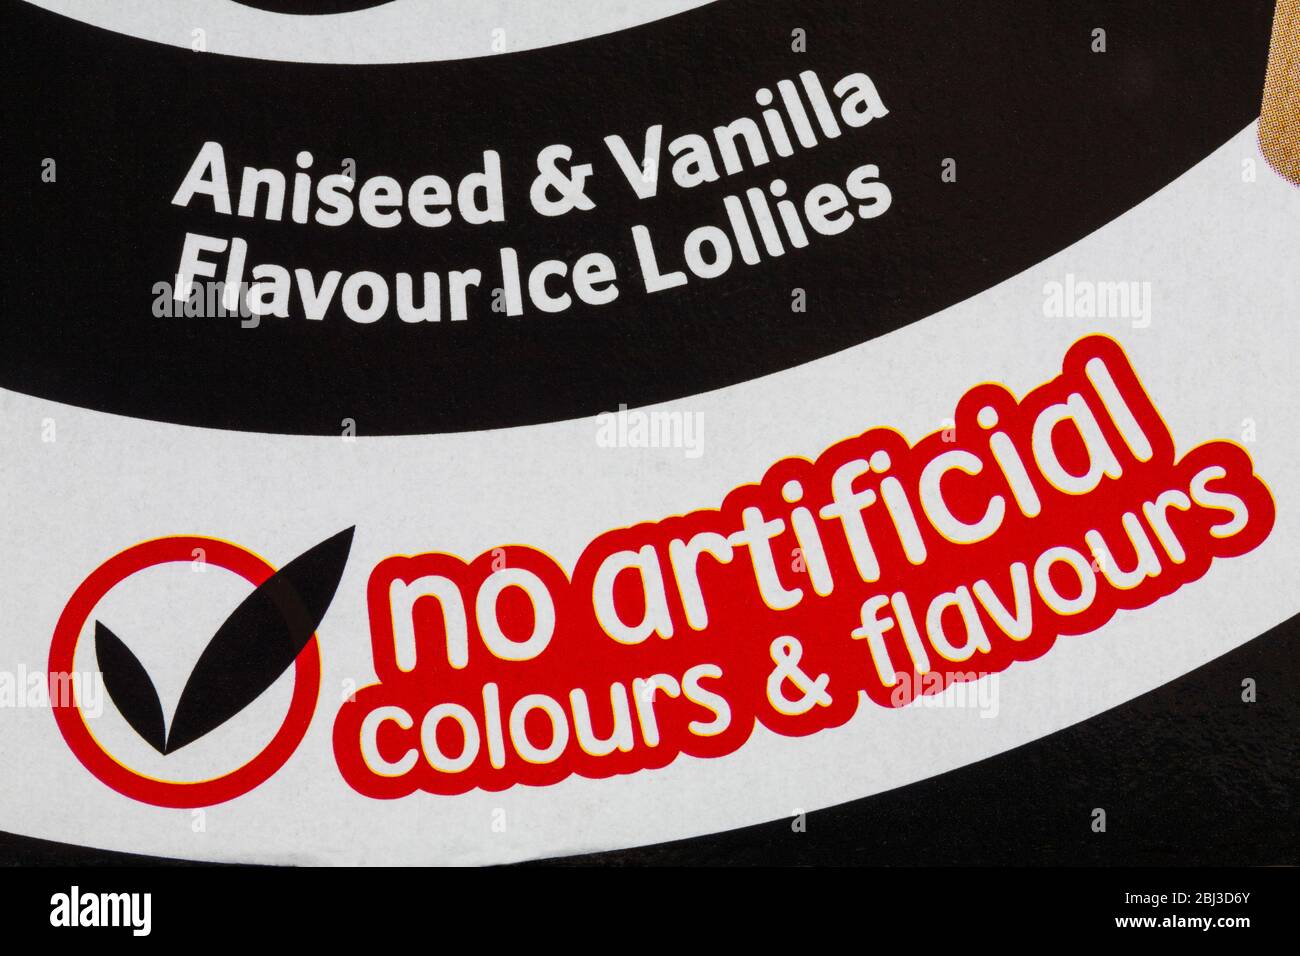 No artificial colours & flavours detail on box of Barratt Black Jack aniseed & vanilla flavour ice lollies Stock Photo